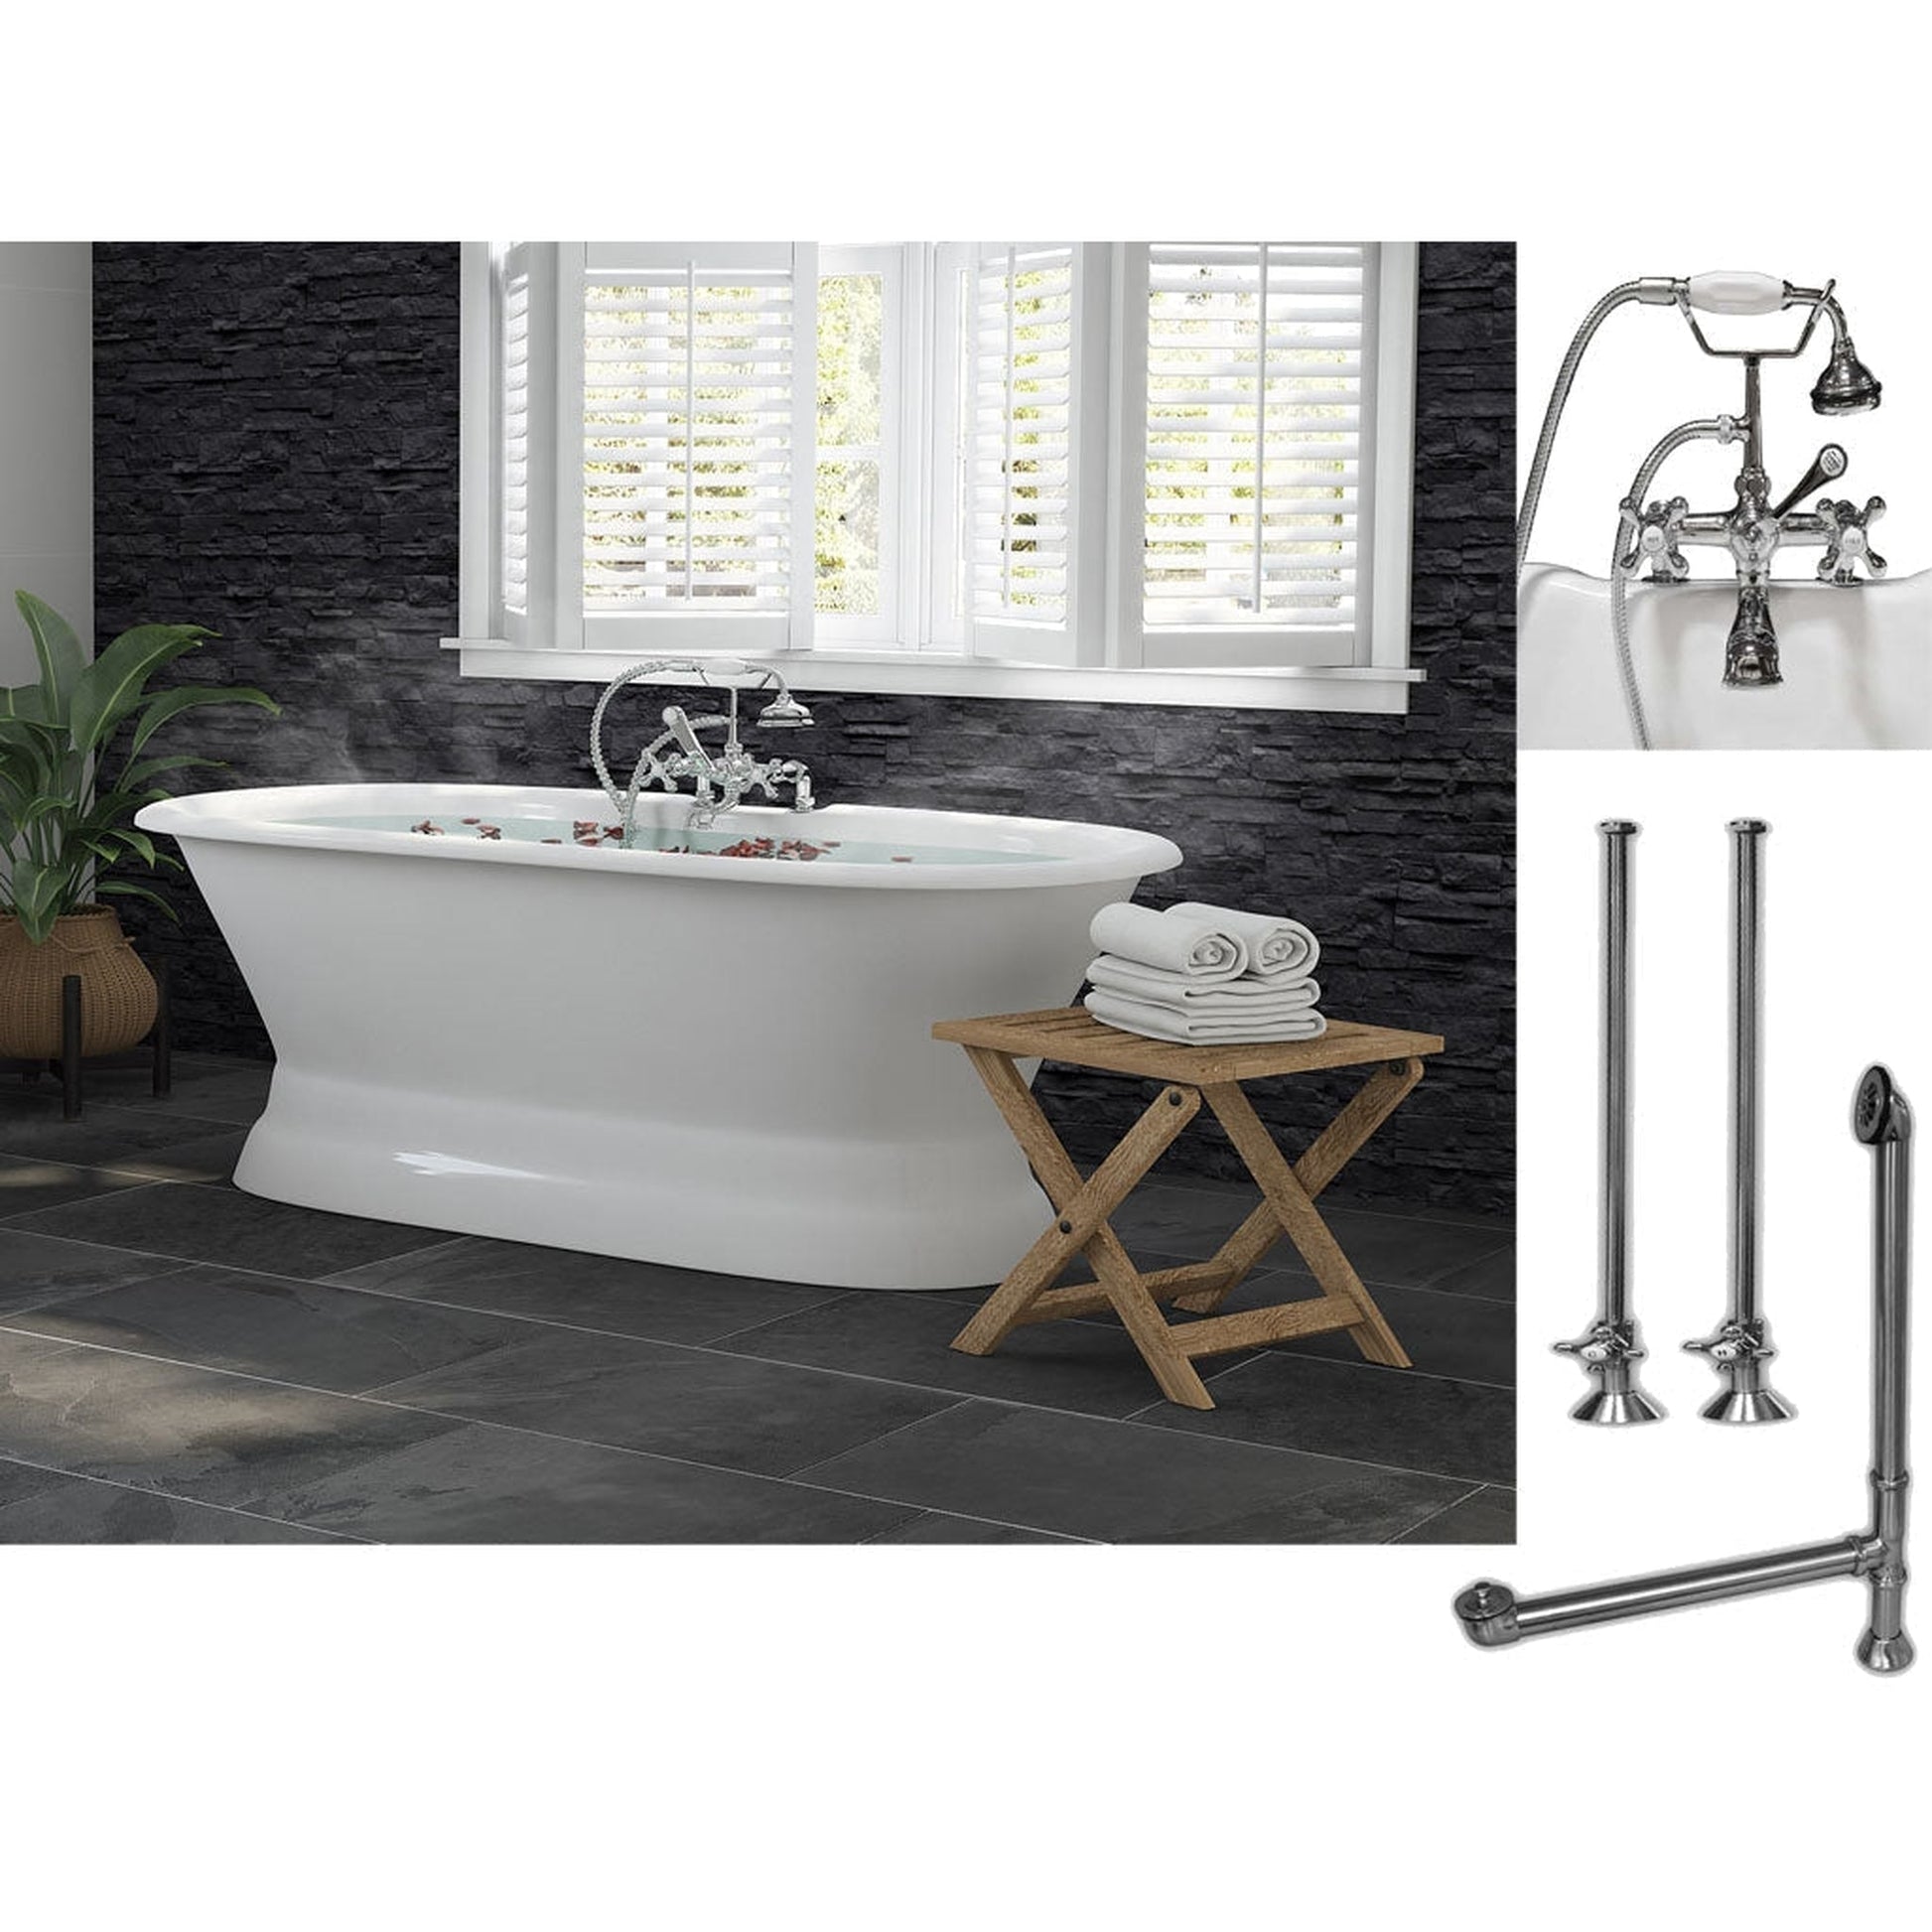 Cambridge Plumbing 66" White Cast Iron Double Ended Pedestal Bathtub With Deck Holes And Complete Plumbing Package Including 2” Riser Deck Mount Faucet, Supply Lines, Drain And Overflow Assembly In Polished Chrome